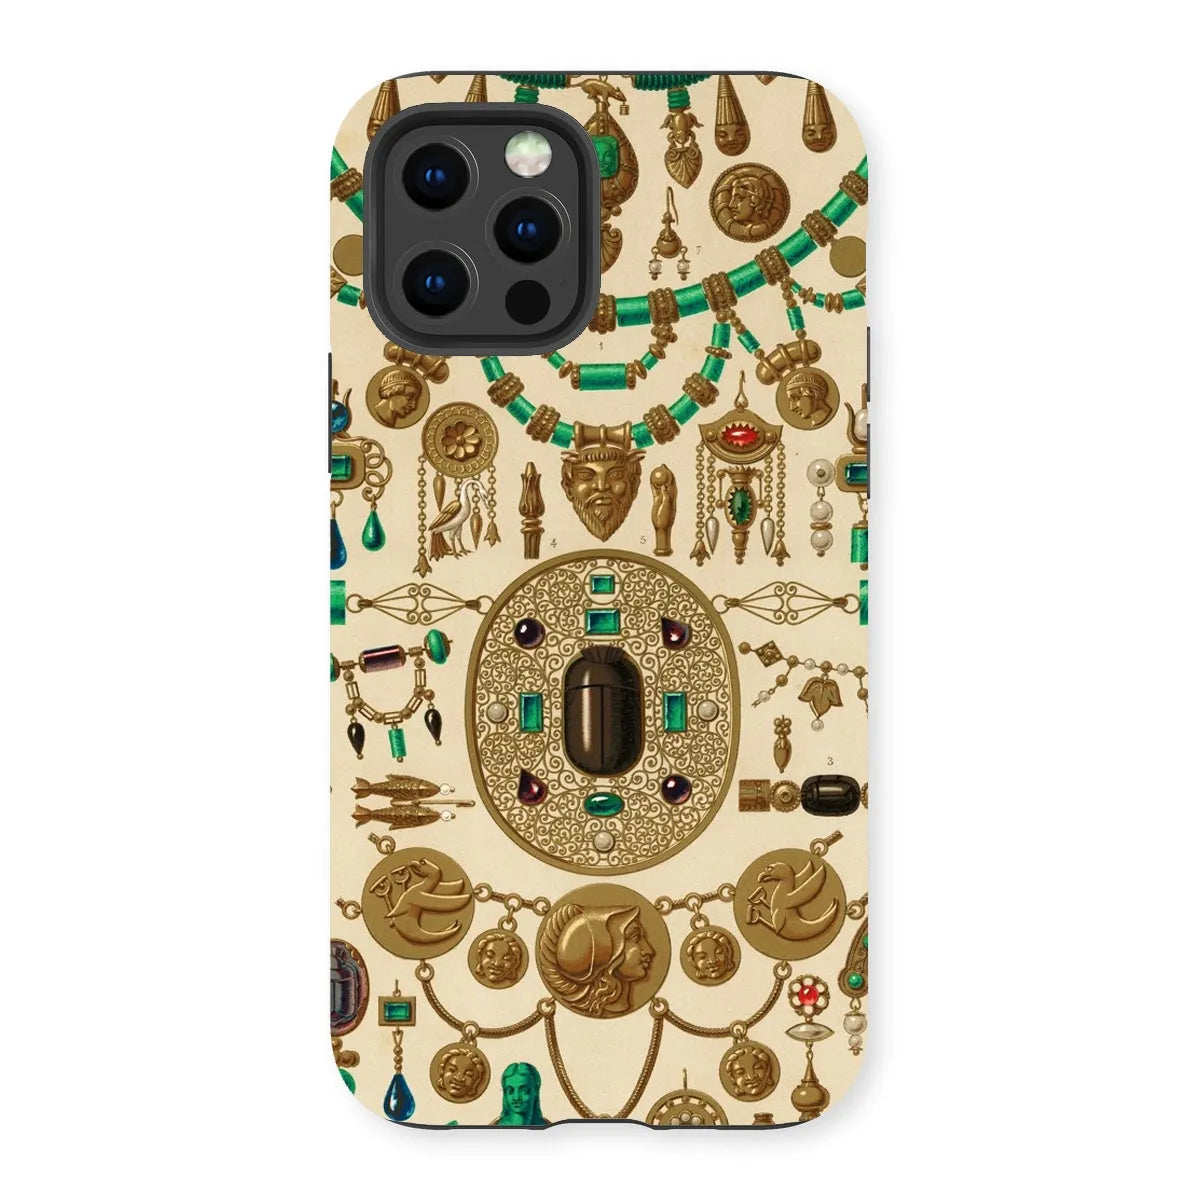 Etruscan Jewelry By Auguste Racinet Art Phone Case - Iphone 13 Pro / Matte - Mobile Phone Cases - Aesthetic Art